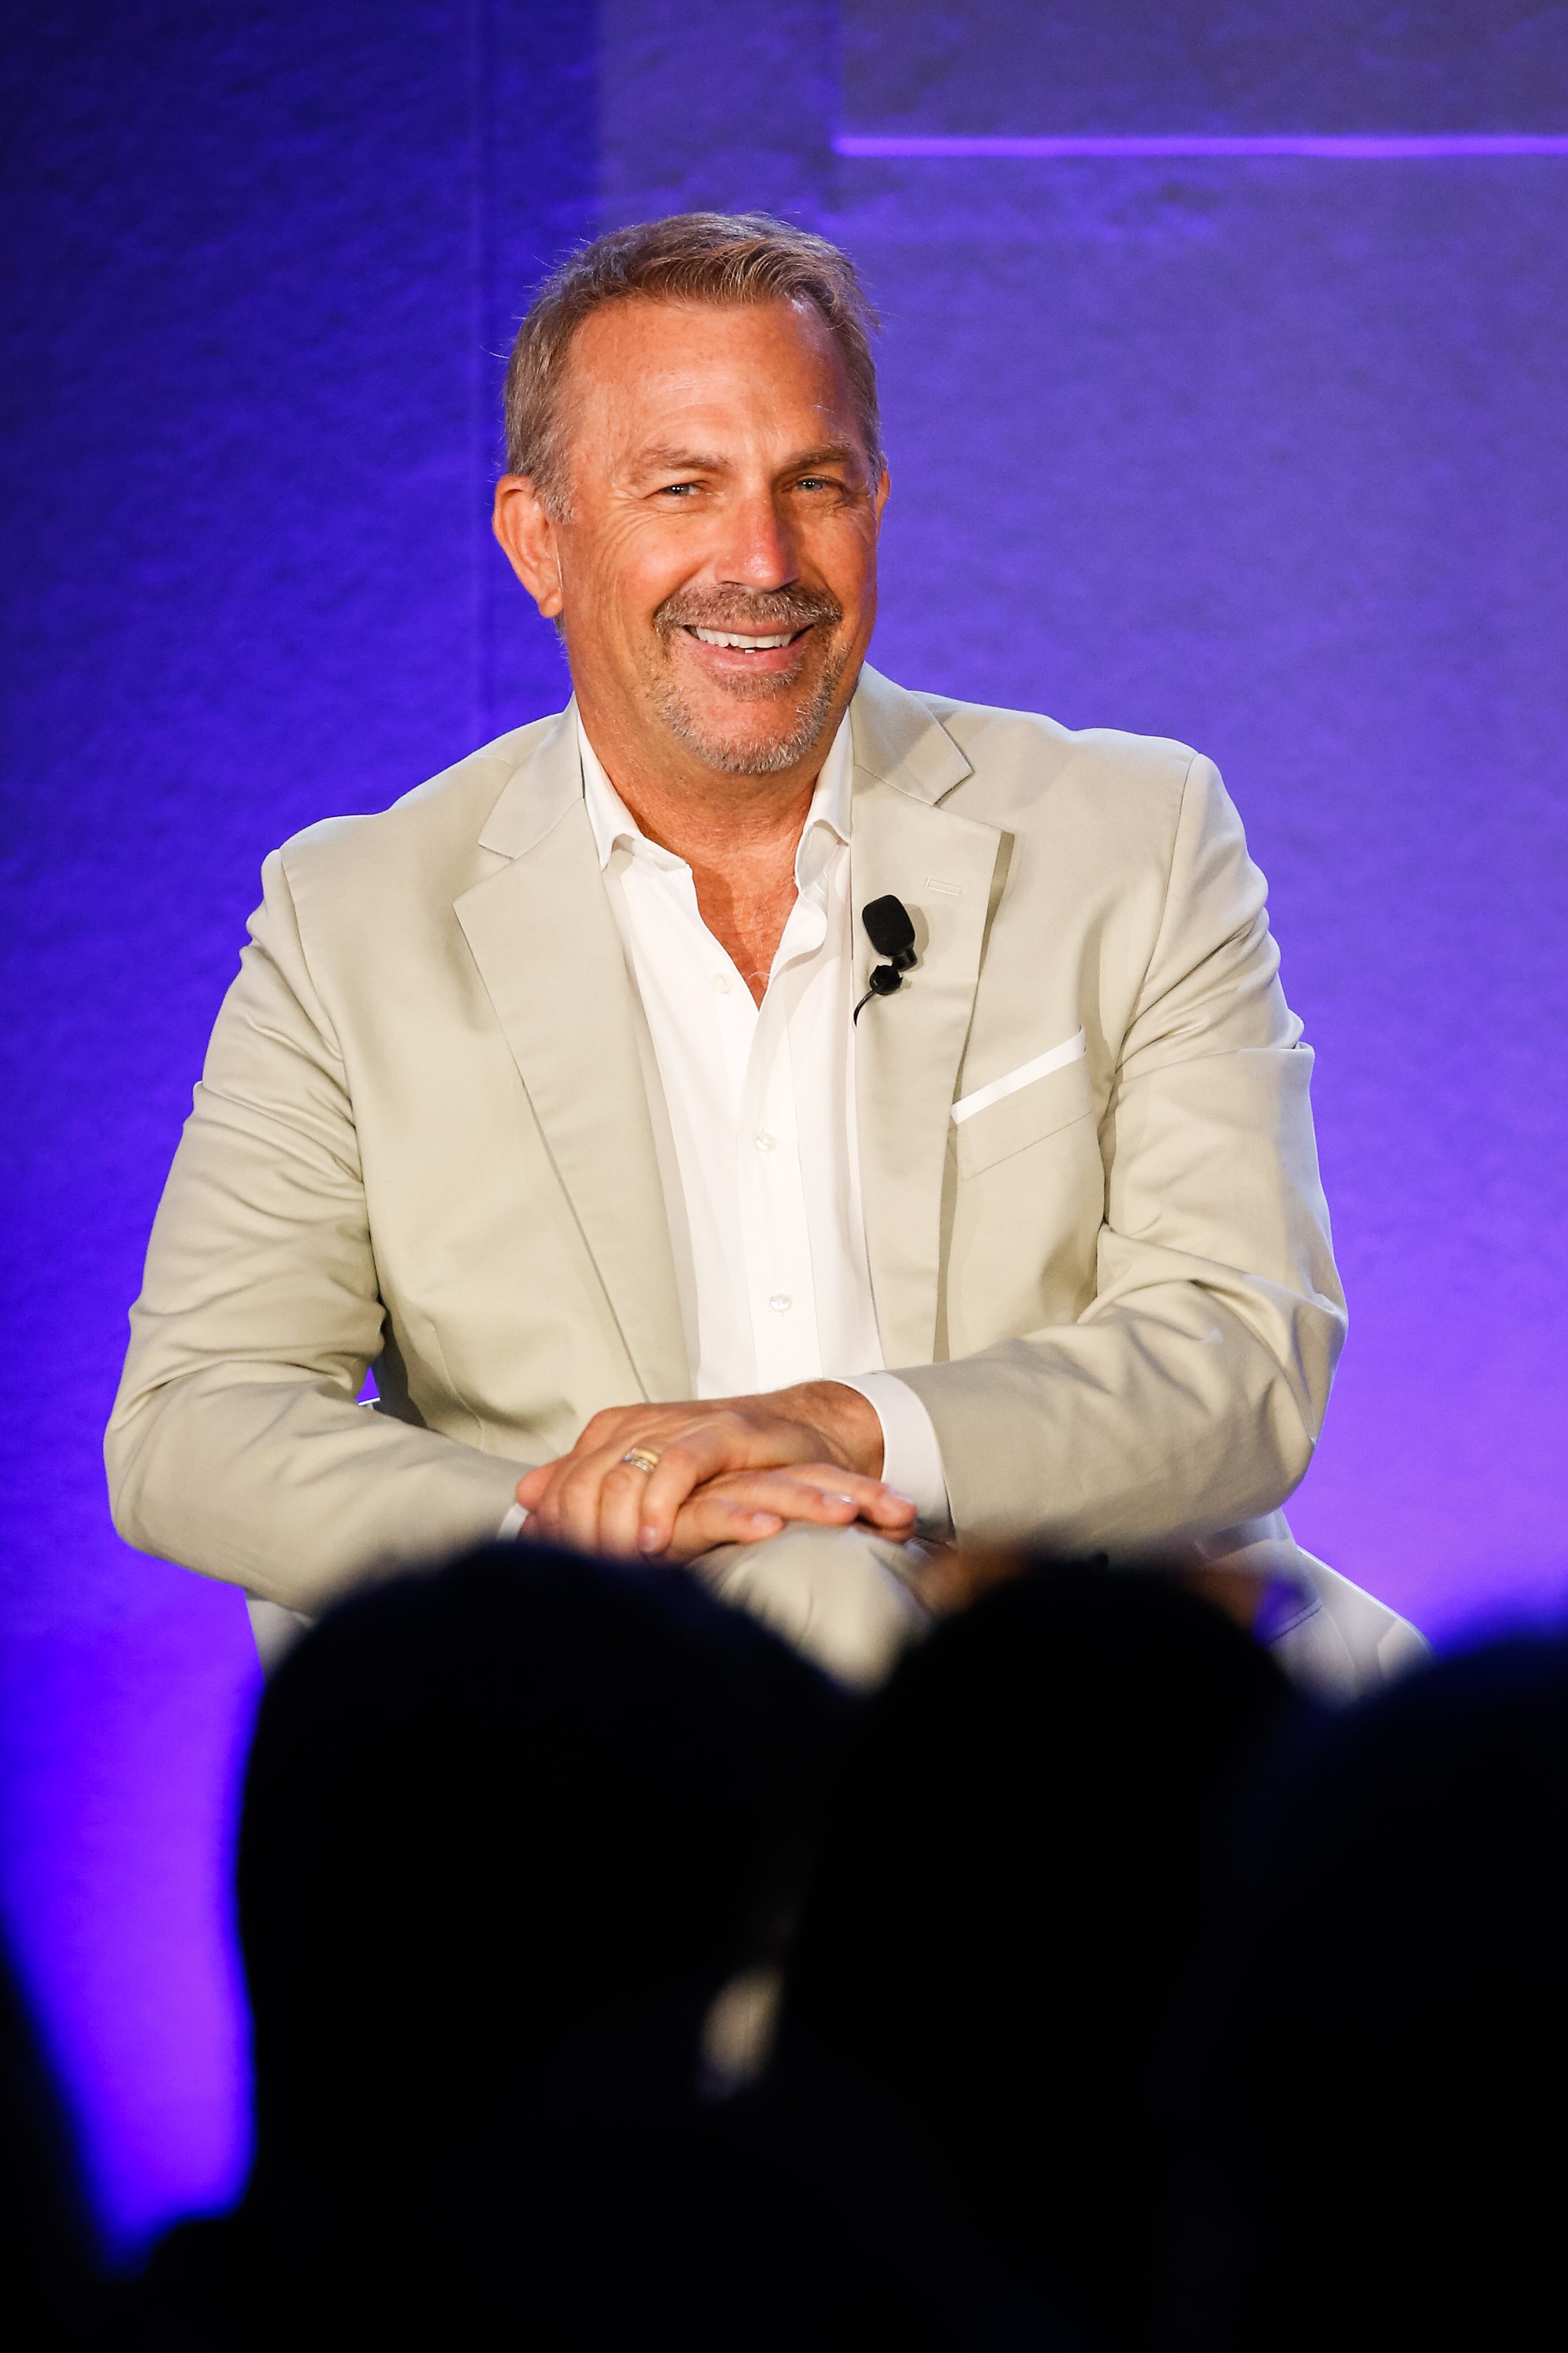 Kevin Costner who portrays John Dutton in "Yellowstone," during a conversation at the Cannes Lions Festival 2018 on June 21, 2018 | Photo: Getty Images